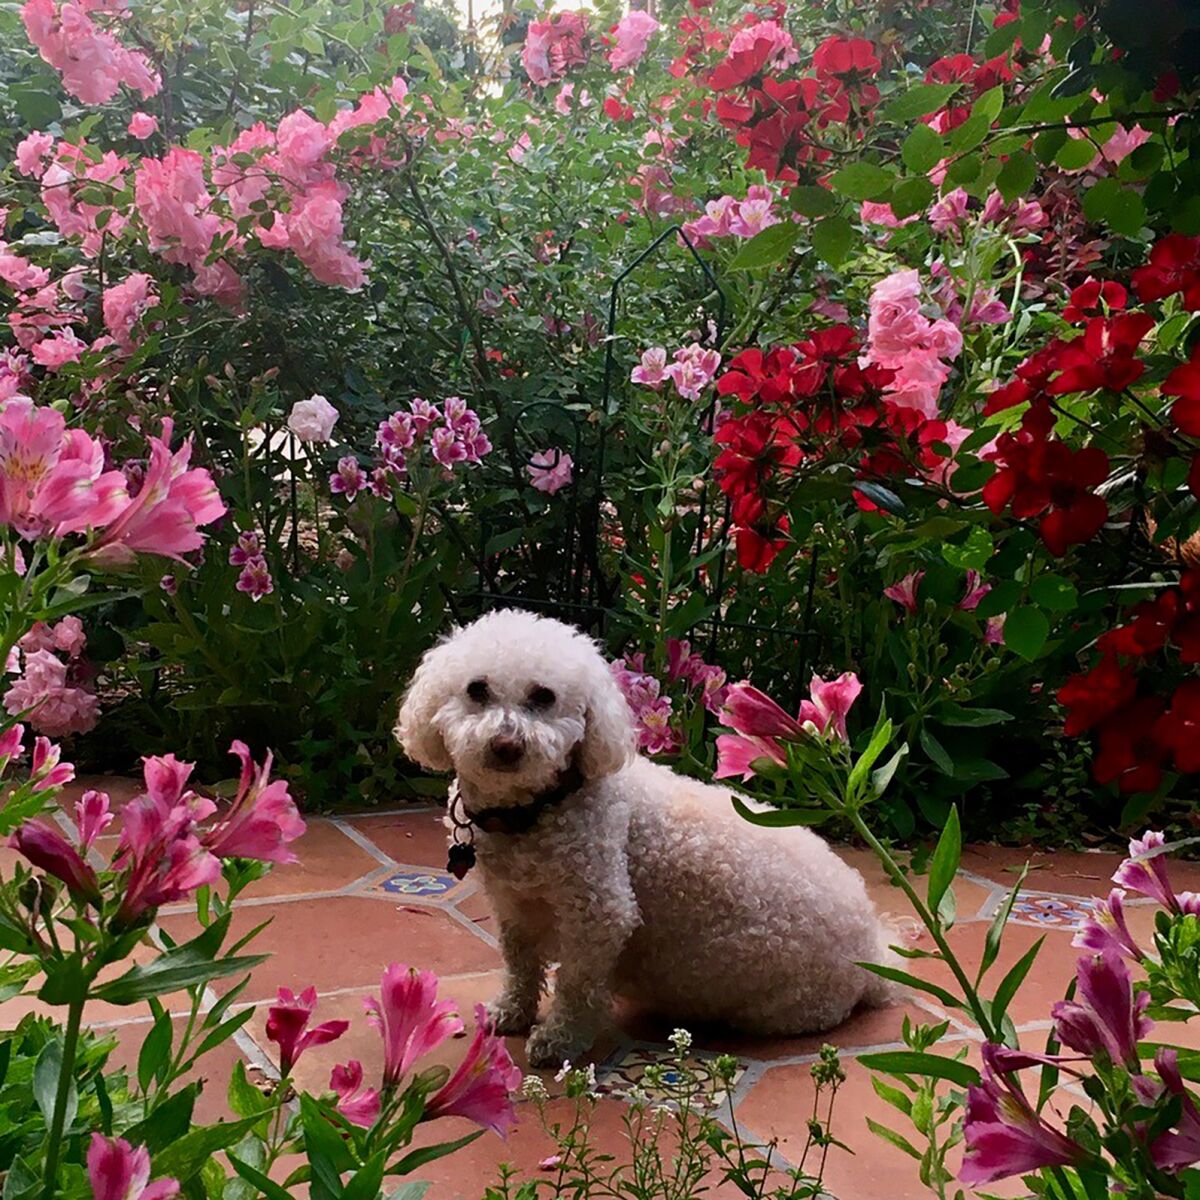 A white dog on an outdoor tile walkway is surrounded by roses and Alstromeria blooms.